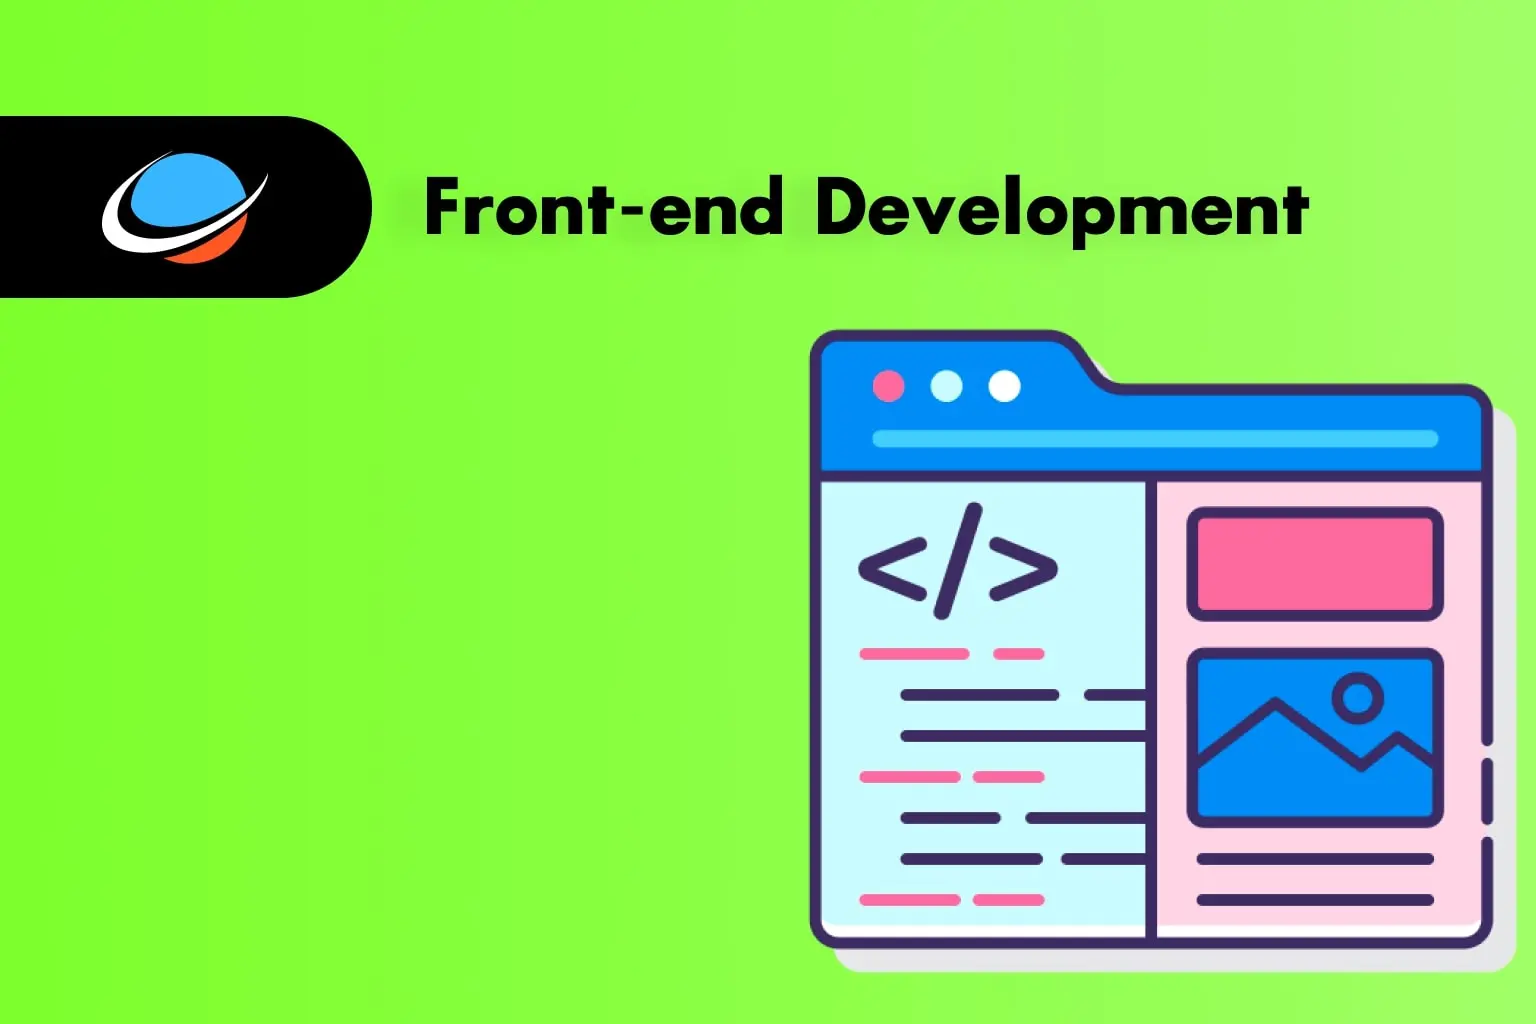 Front End Development. With 7+ years of dedicated expertise, we expertly craft seamless, user-centric interfaces. Our dynamic team ensures your digital presence captivates and engages. Join us where creativity meets cutting-edge functionality!